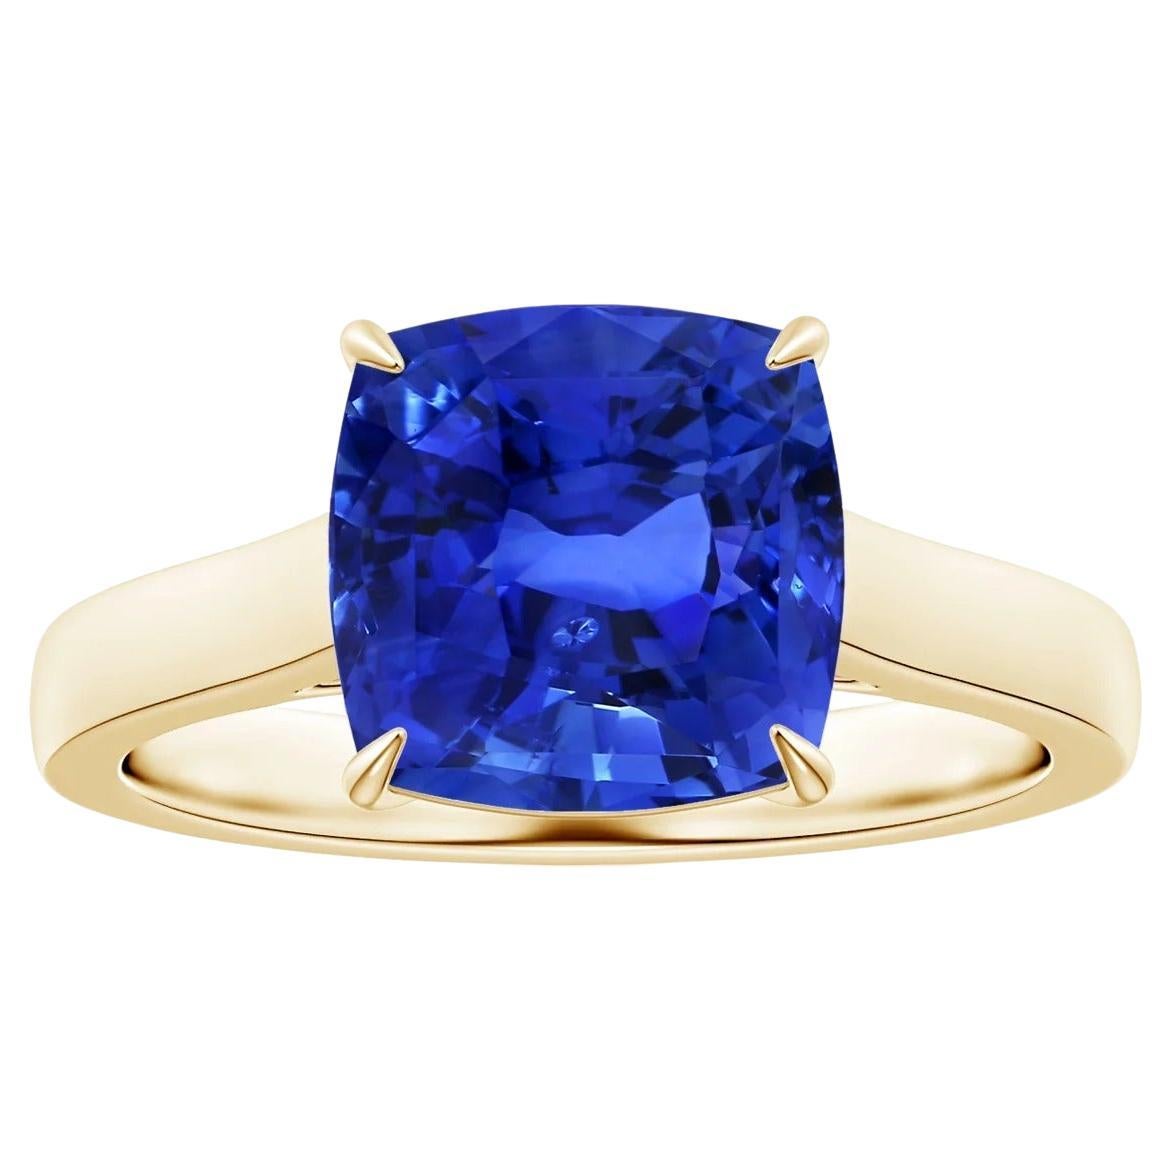 For Sale:  Angara GIA Certified Cushion Blue Sapphire Solitaire Ring in Yellow Gold